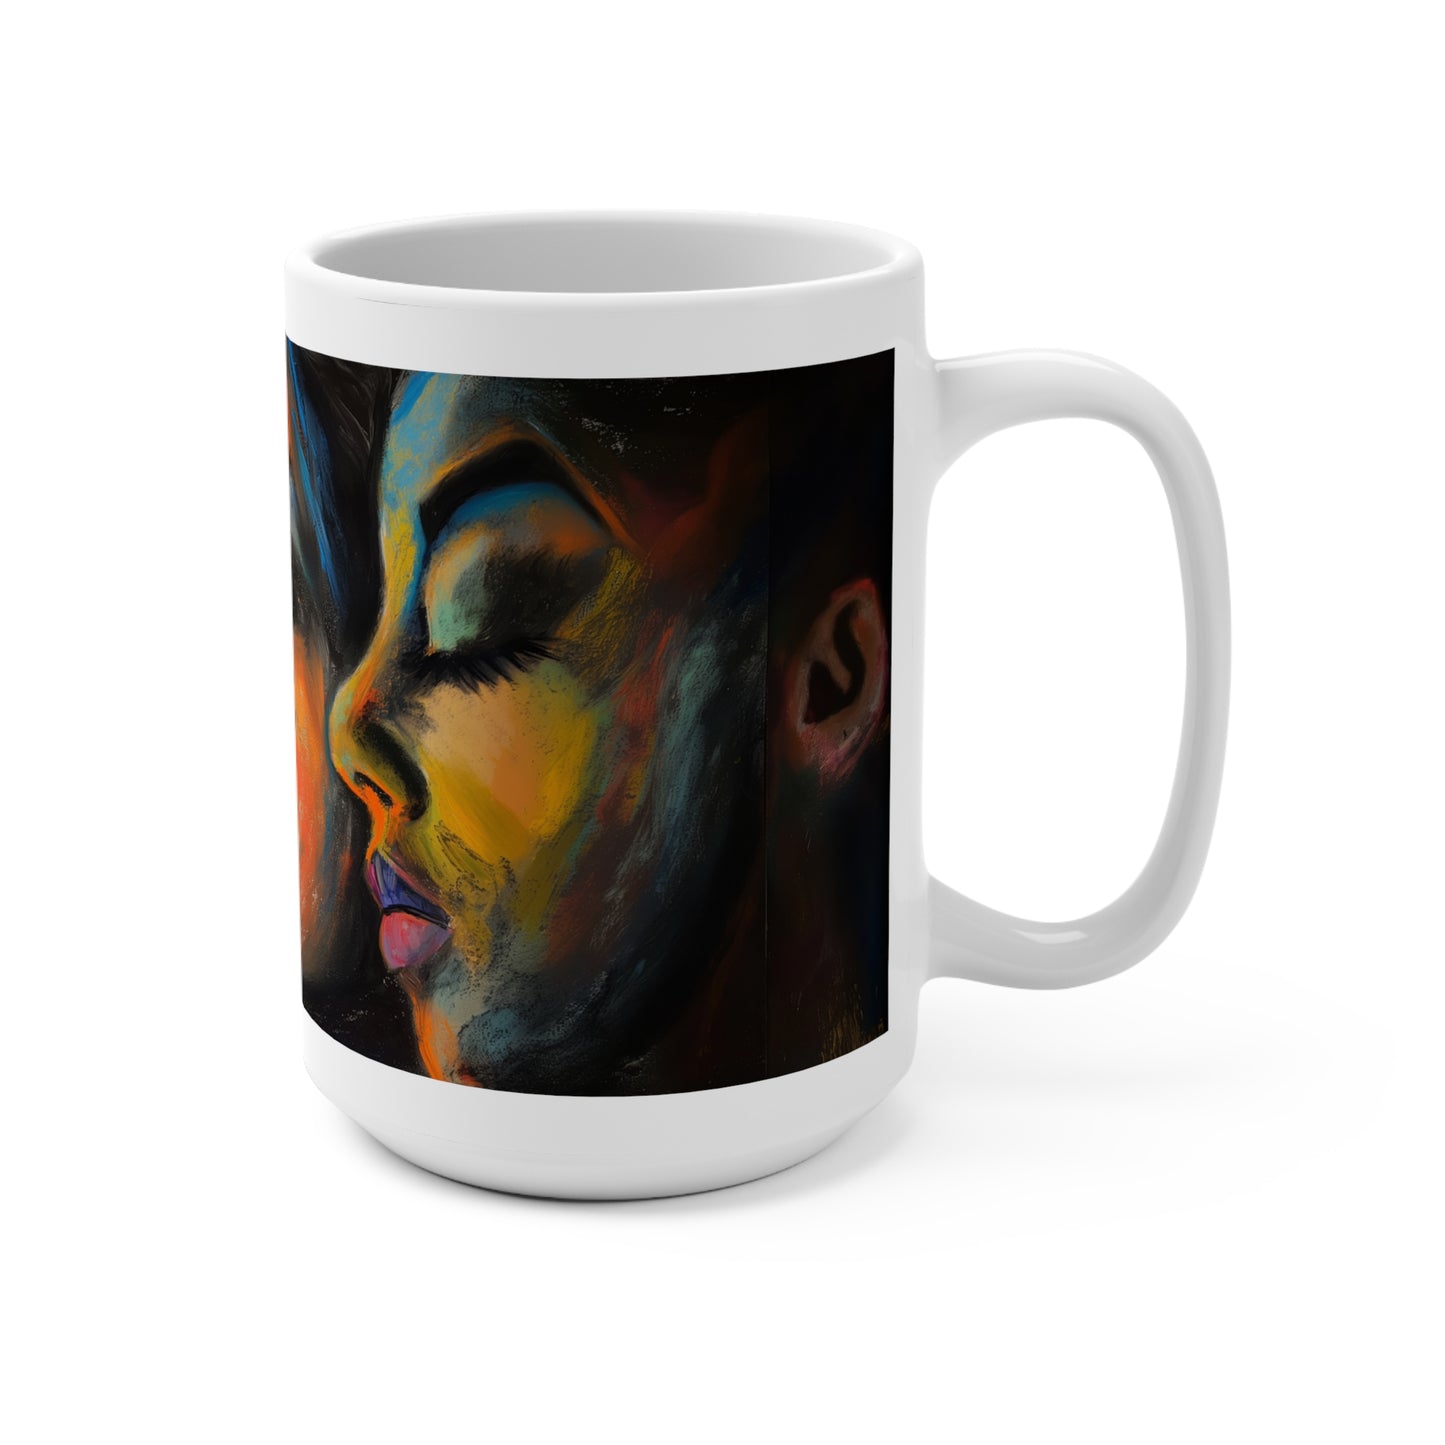 Love is Love! Bold and Inspirational Statement Coffee Mug (15oz): Evocative Expressionist Style Political Activism